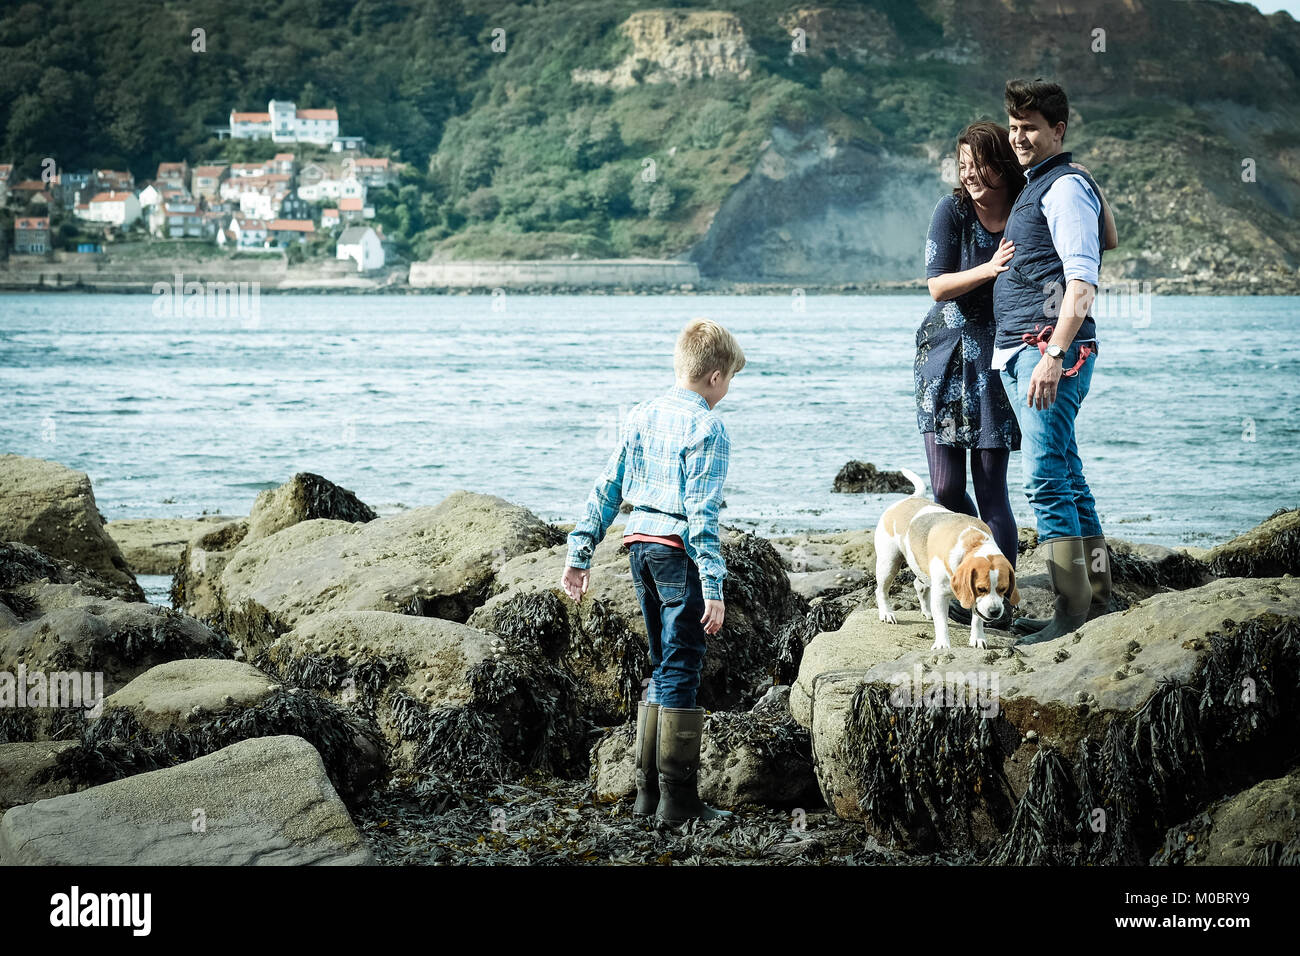 Boy playing on the rocks with his parents and family dog. Family enjoying their holiday on the UK coast, seaside, in Runswick Bay, Yorkshire. Stock Photo